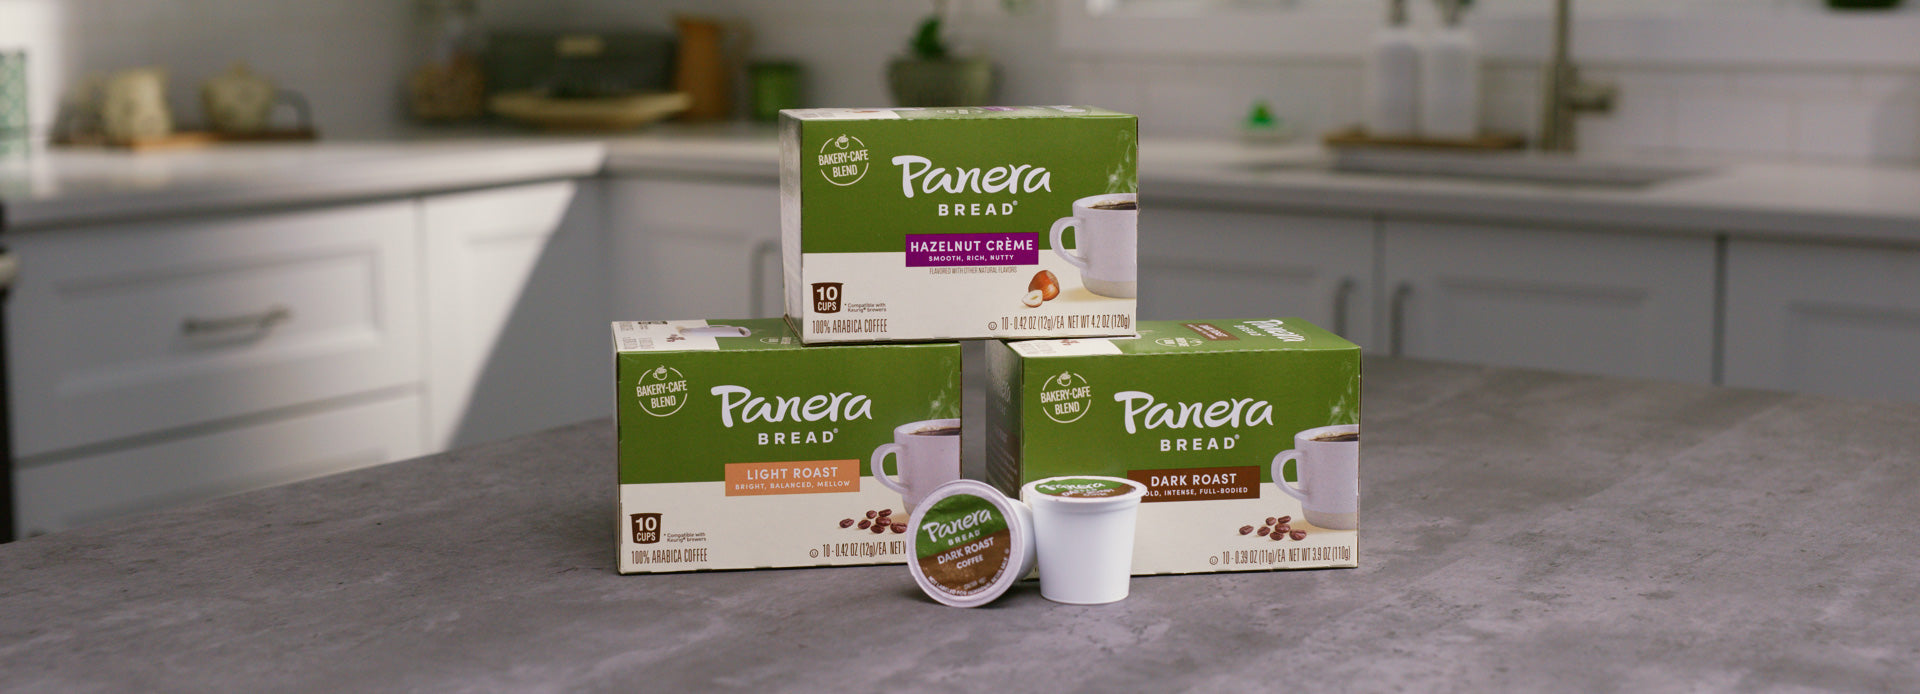 panera green carton trio stacked on kitchen table with single serve pods in front